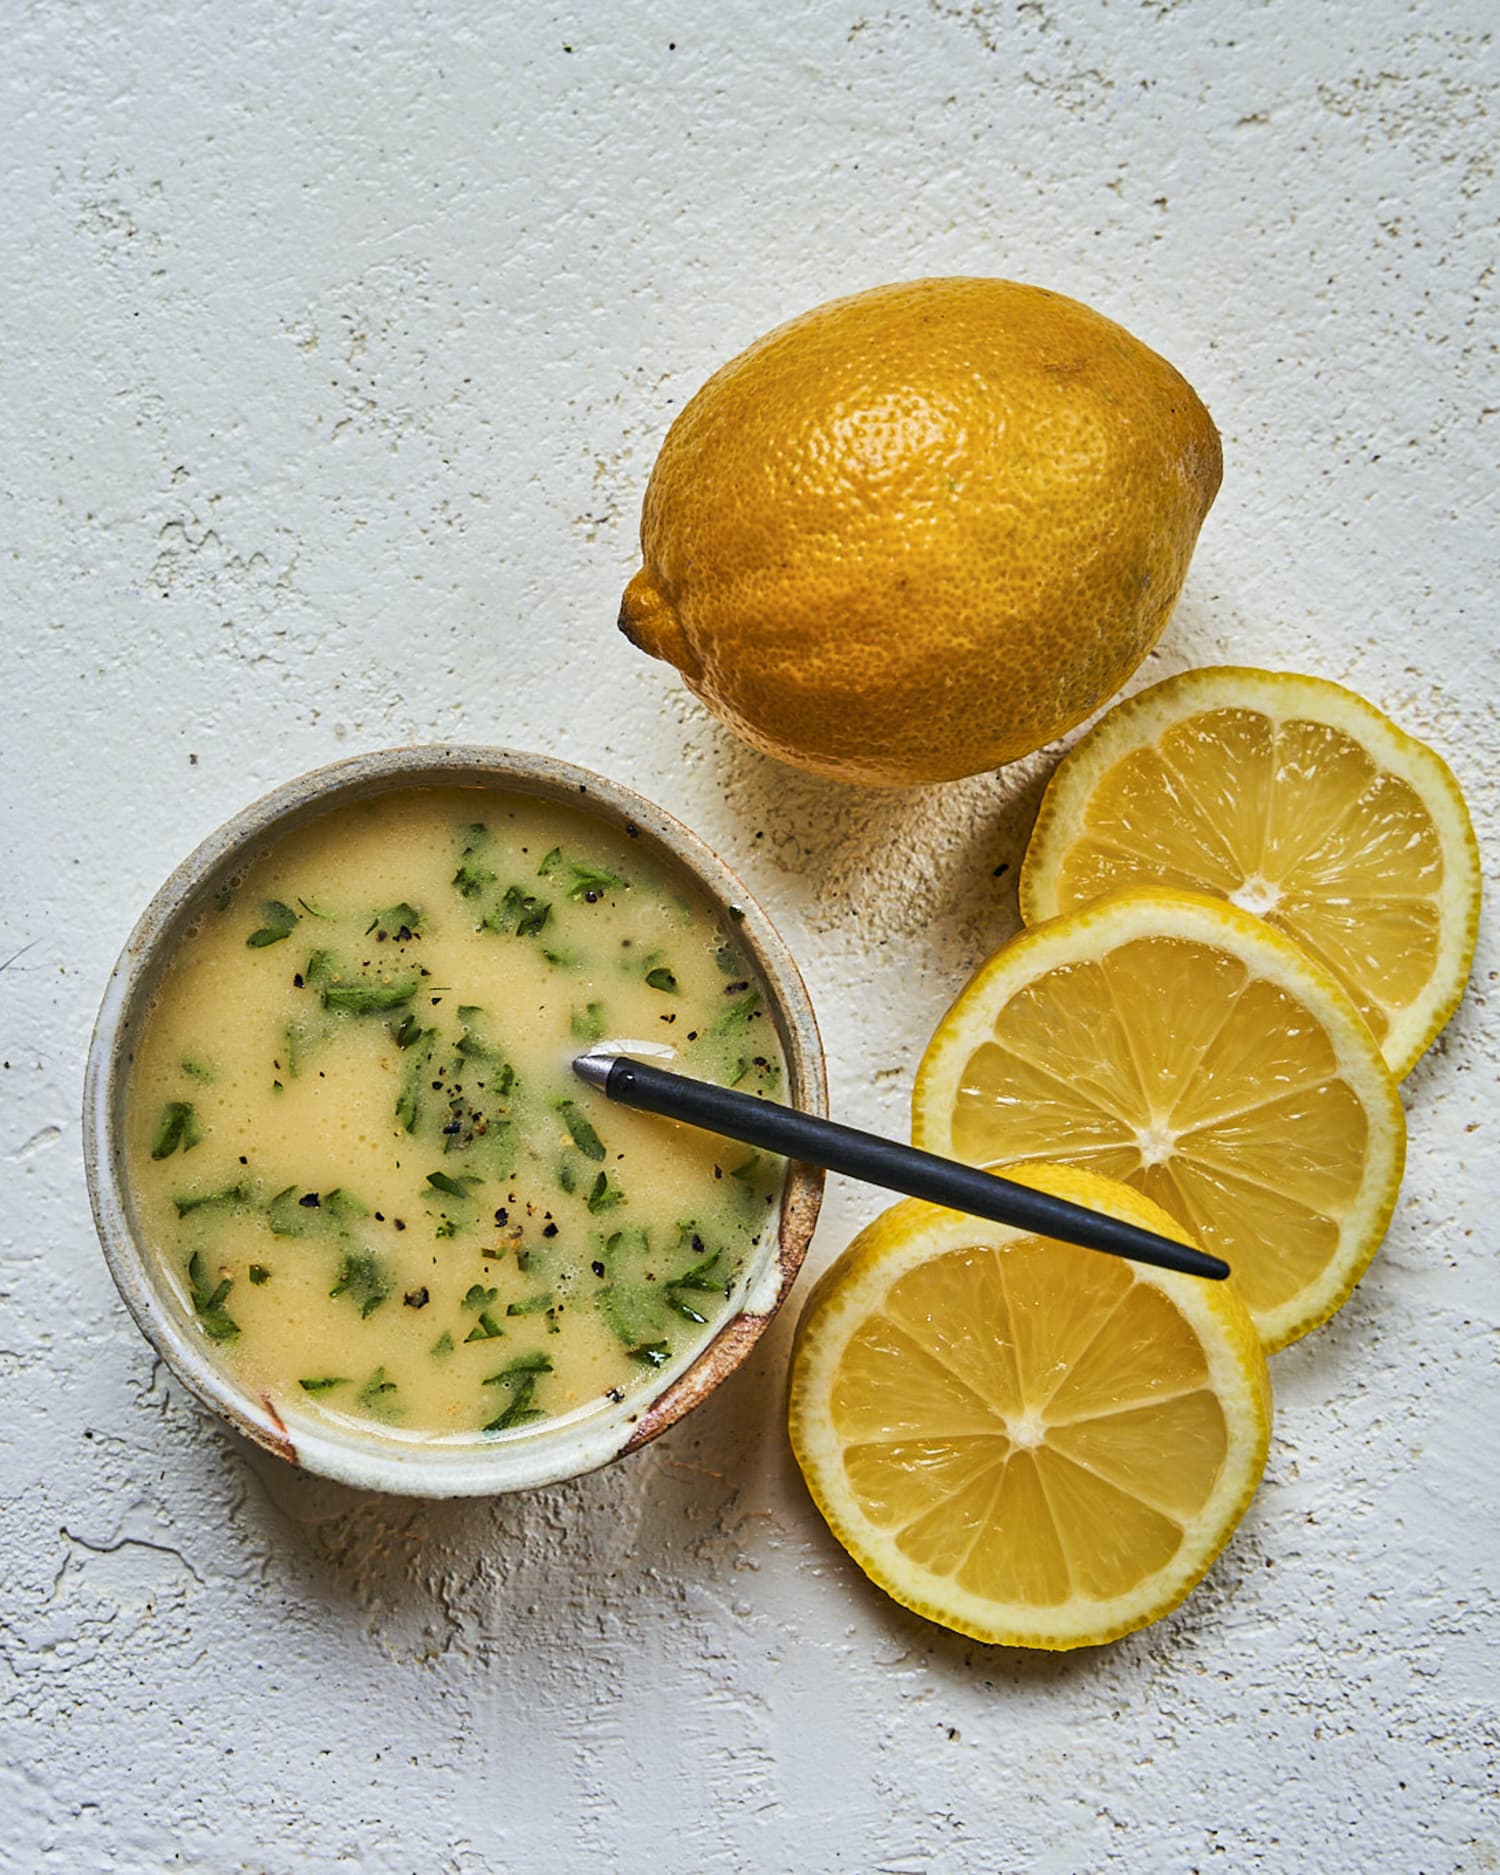 This Easy Lemon Butter Sauce Is the Easiest Way to Upgrade Dinner